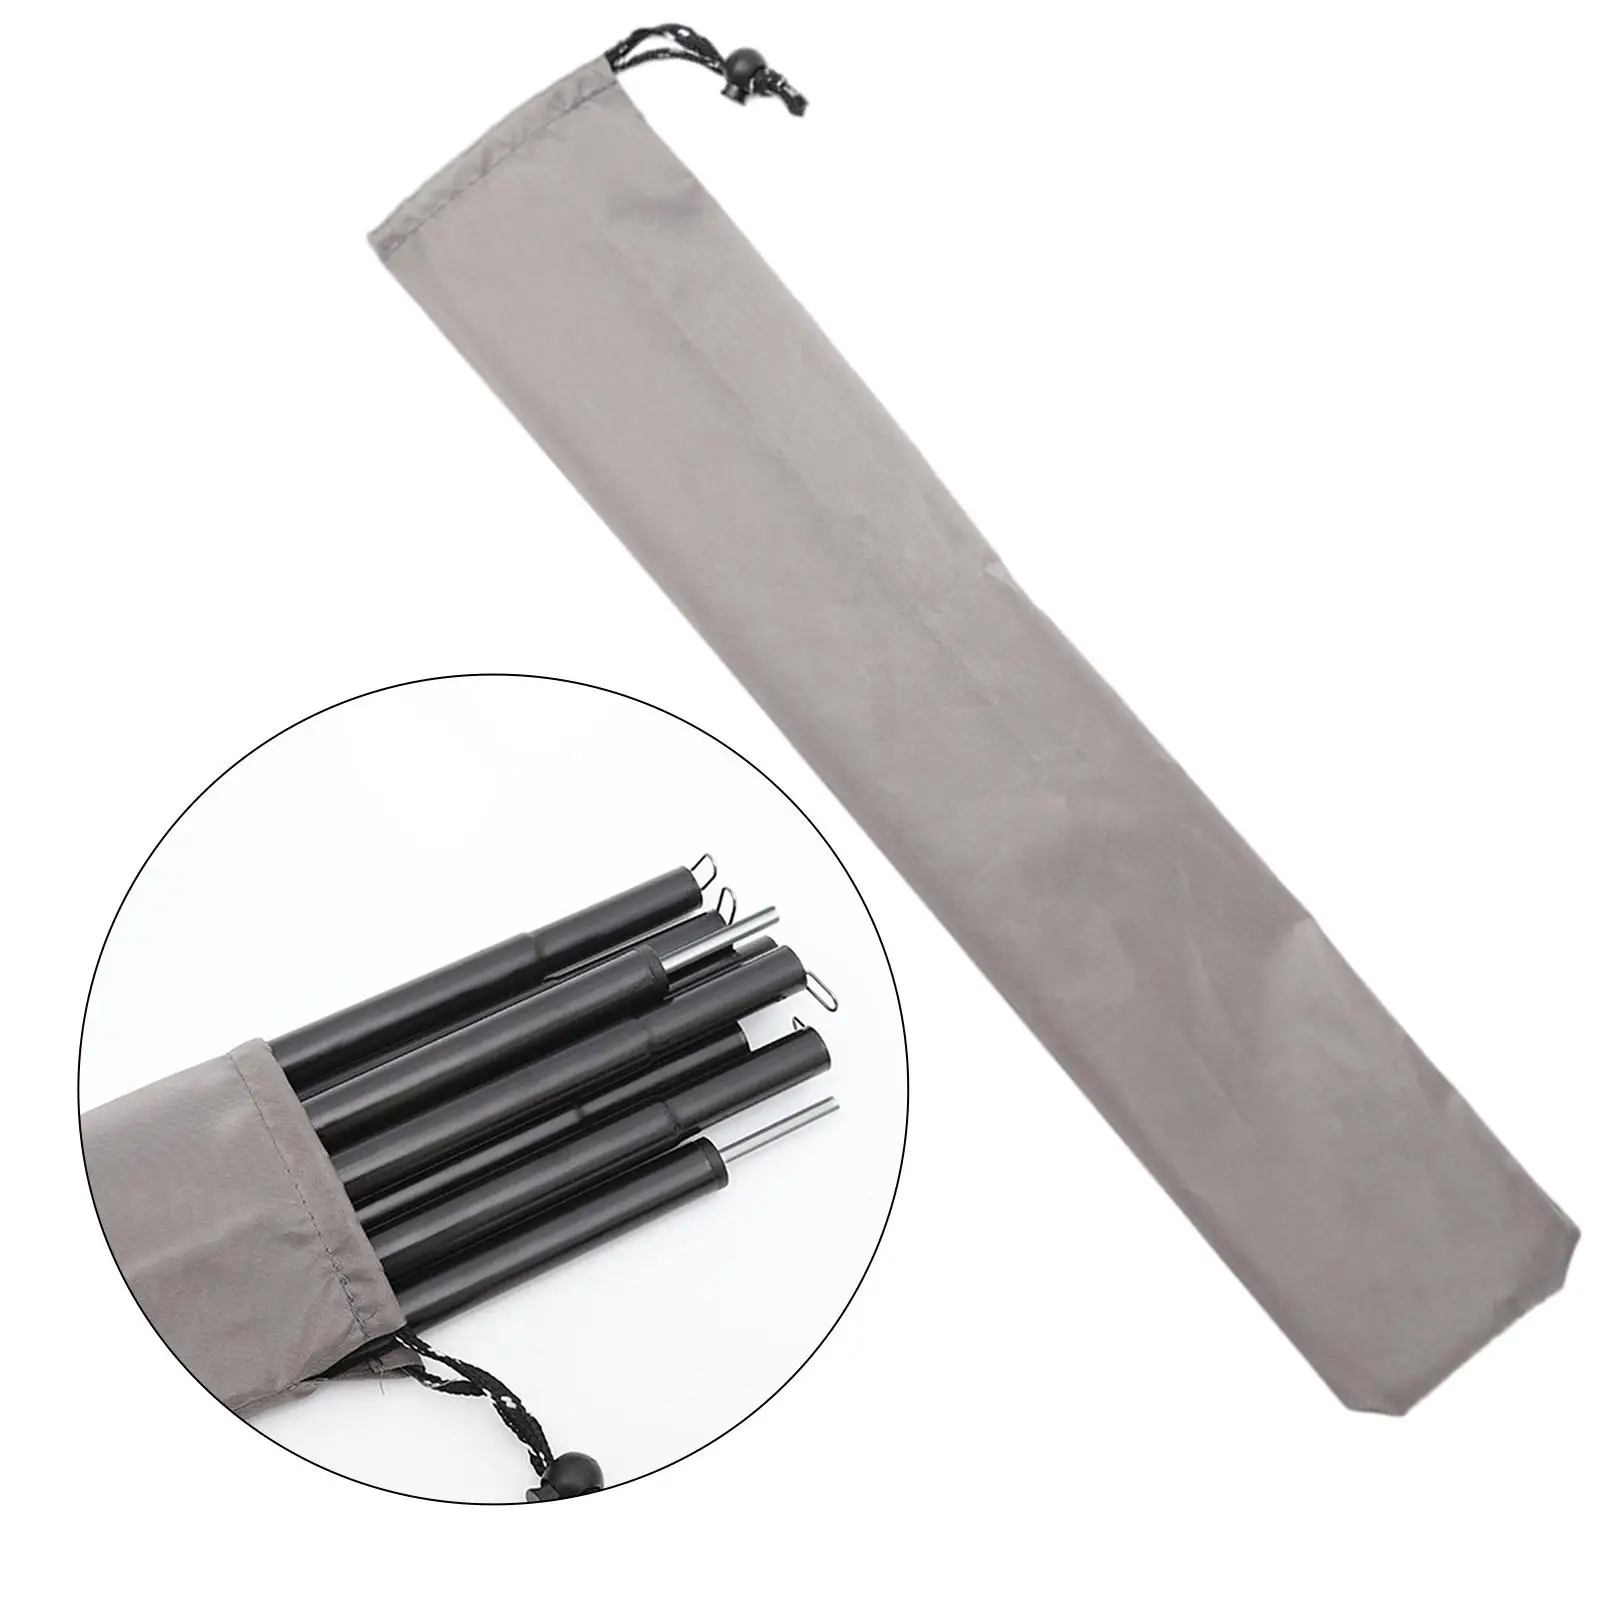 Portable Awning Tent Pegs Storage Pouch, 57cm Long , RV Polyester  Bags,